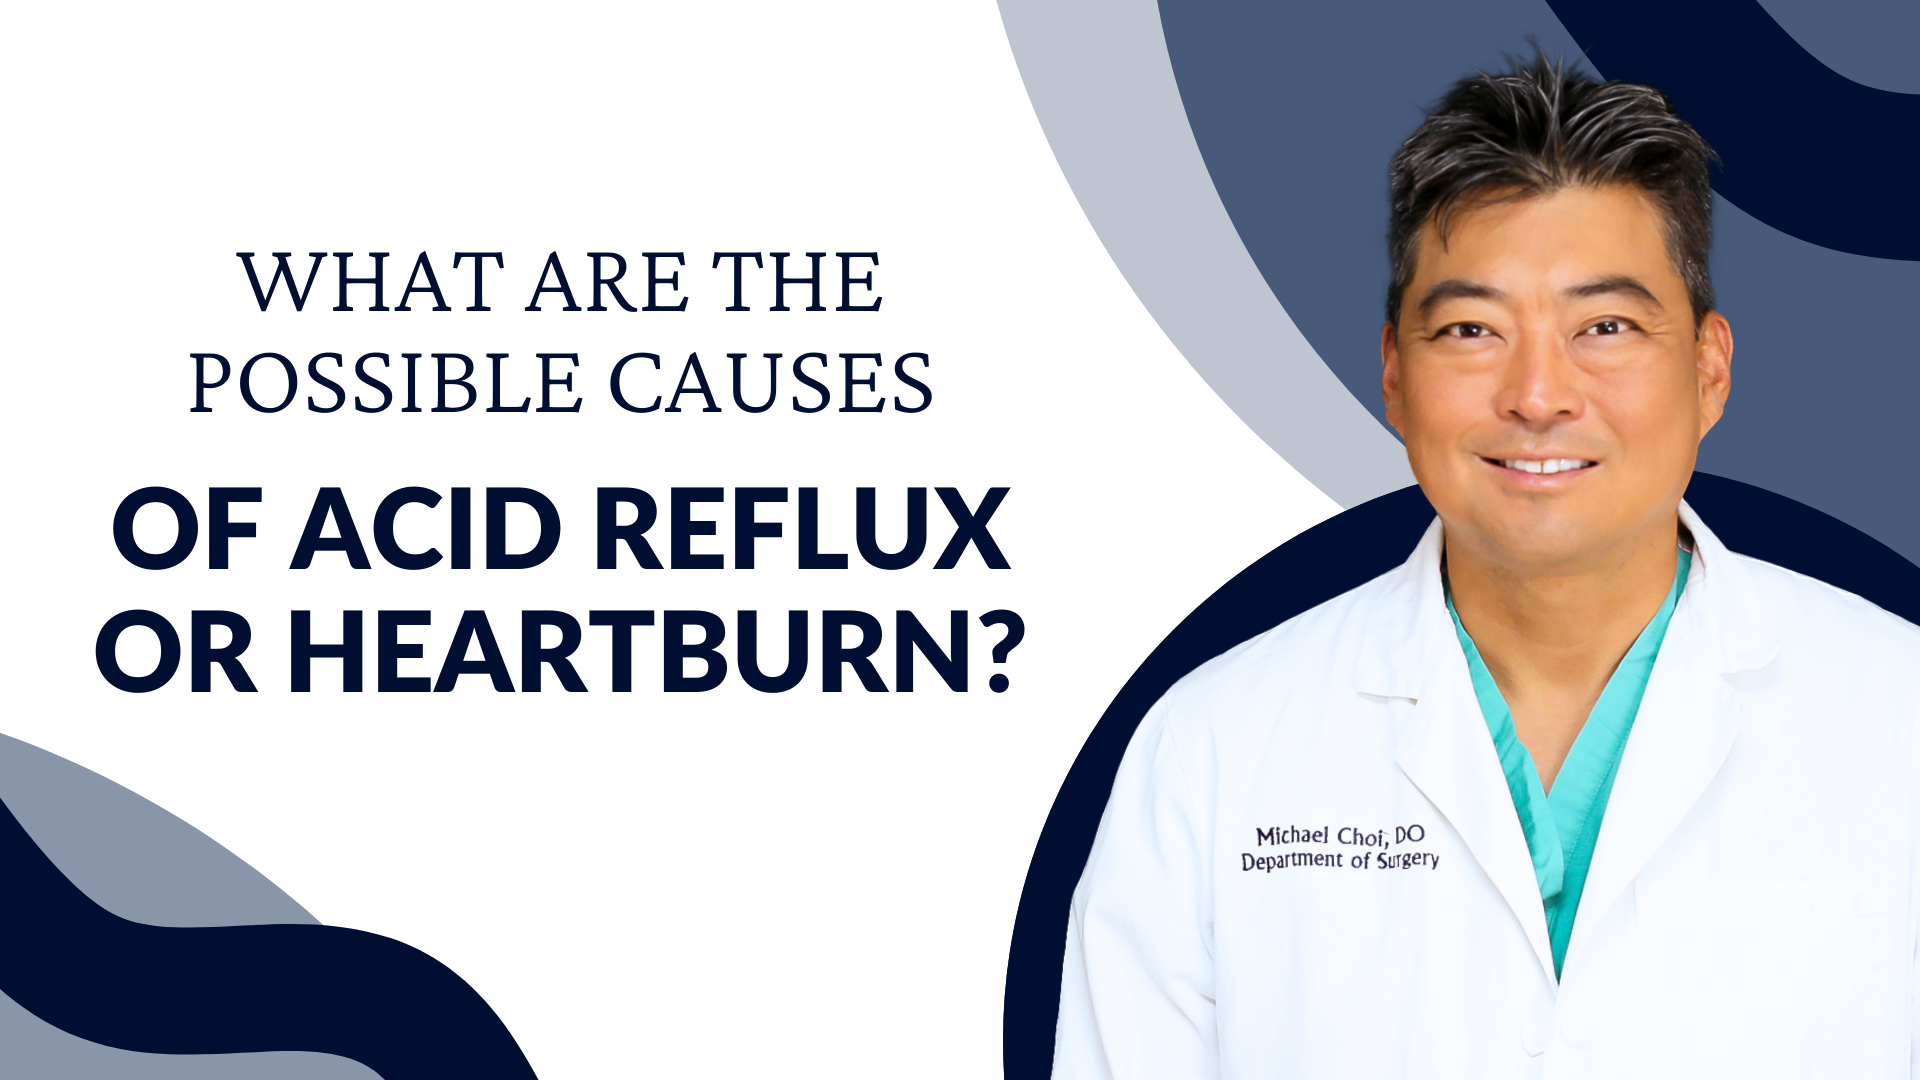 What Are the Possible Causes of Acid Reflux or Heartburn